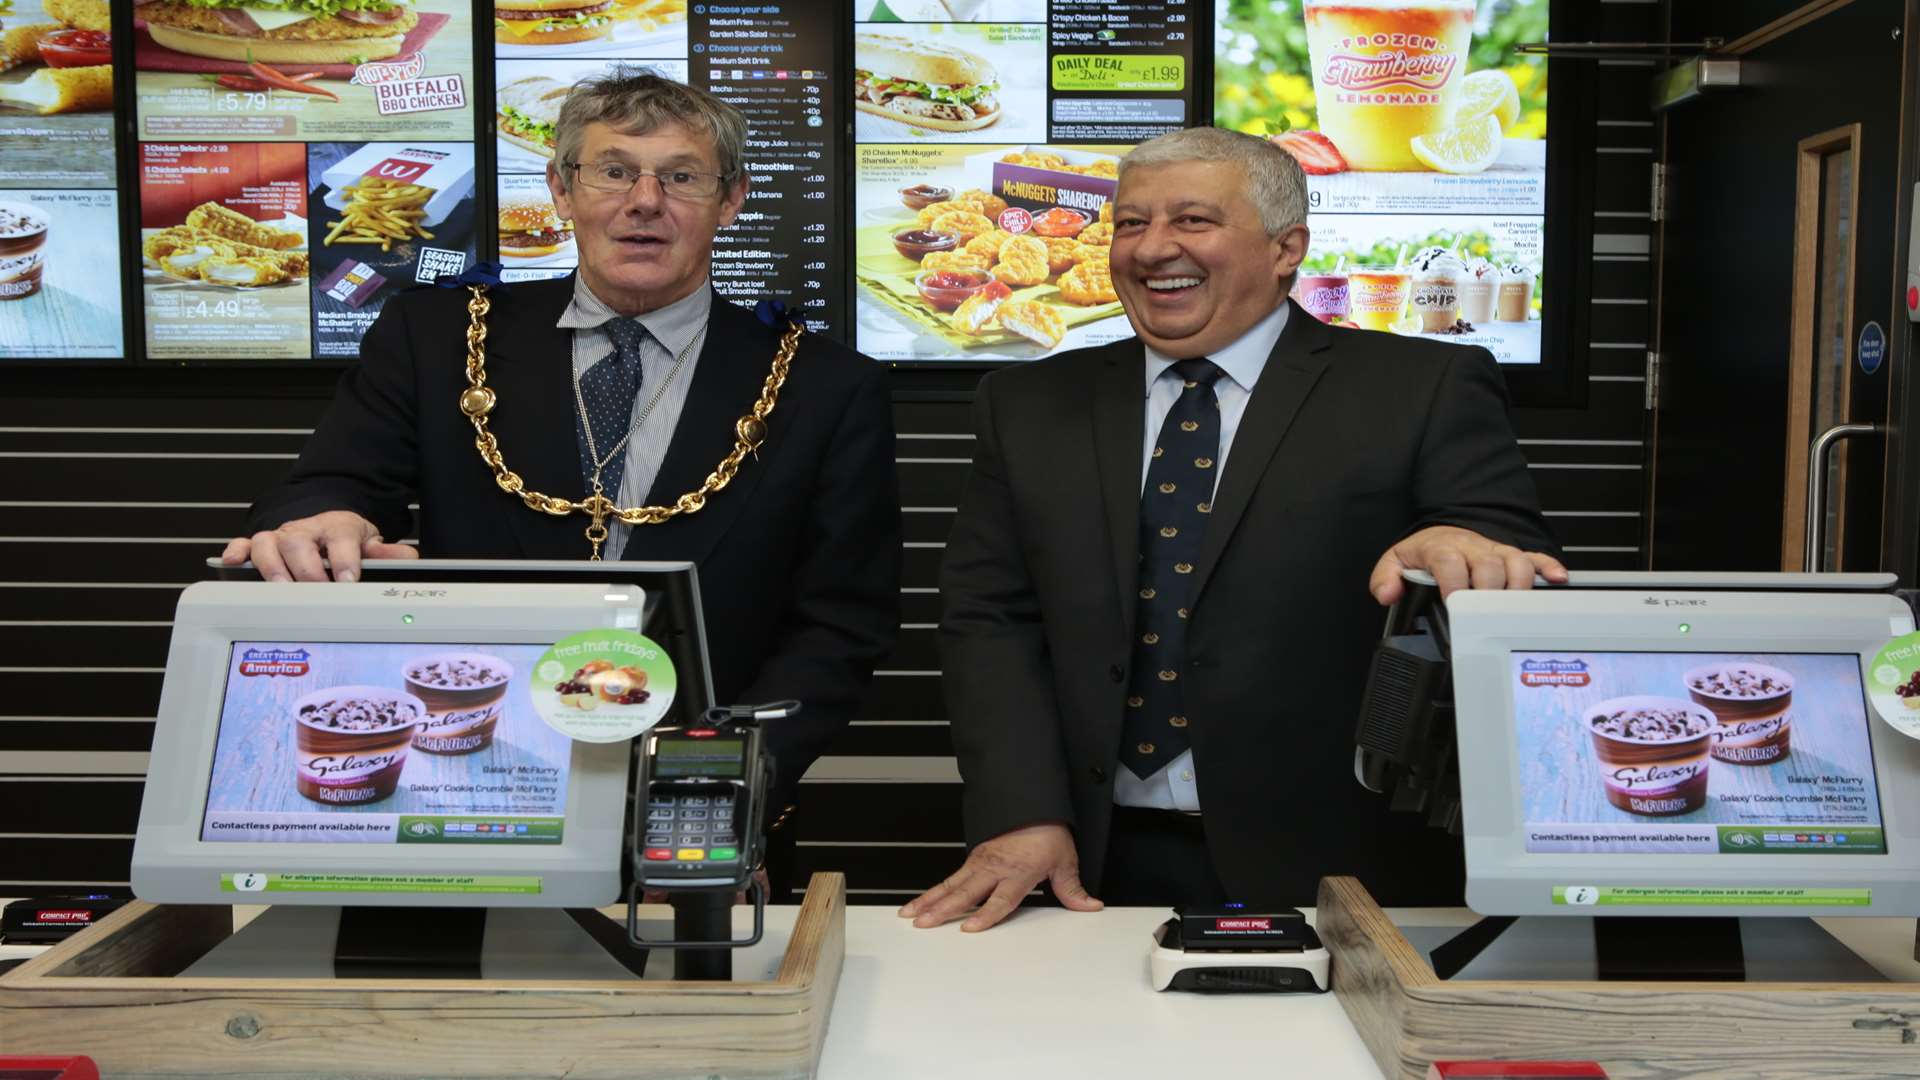 Cllr Richard Thick, the Mayor of Maidstone, and Ali El Hajj, franchisee of the new McDonald's